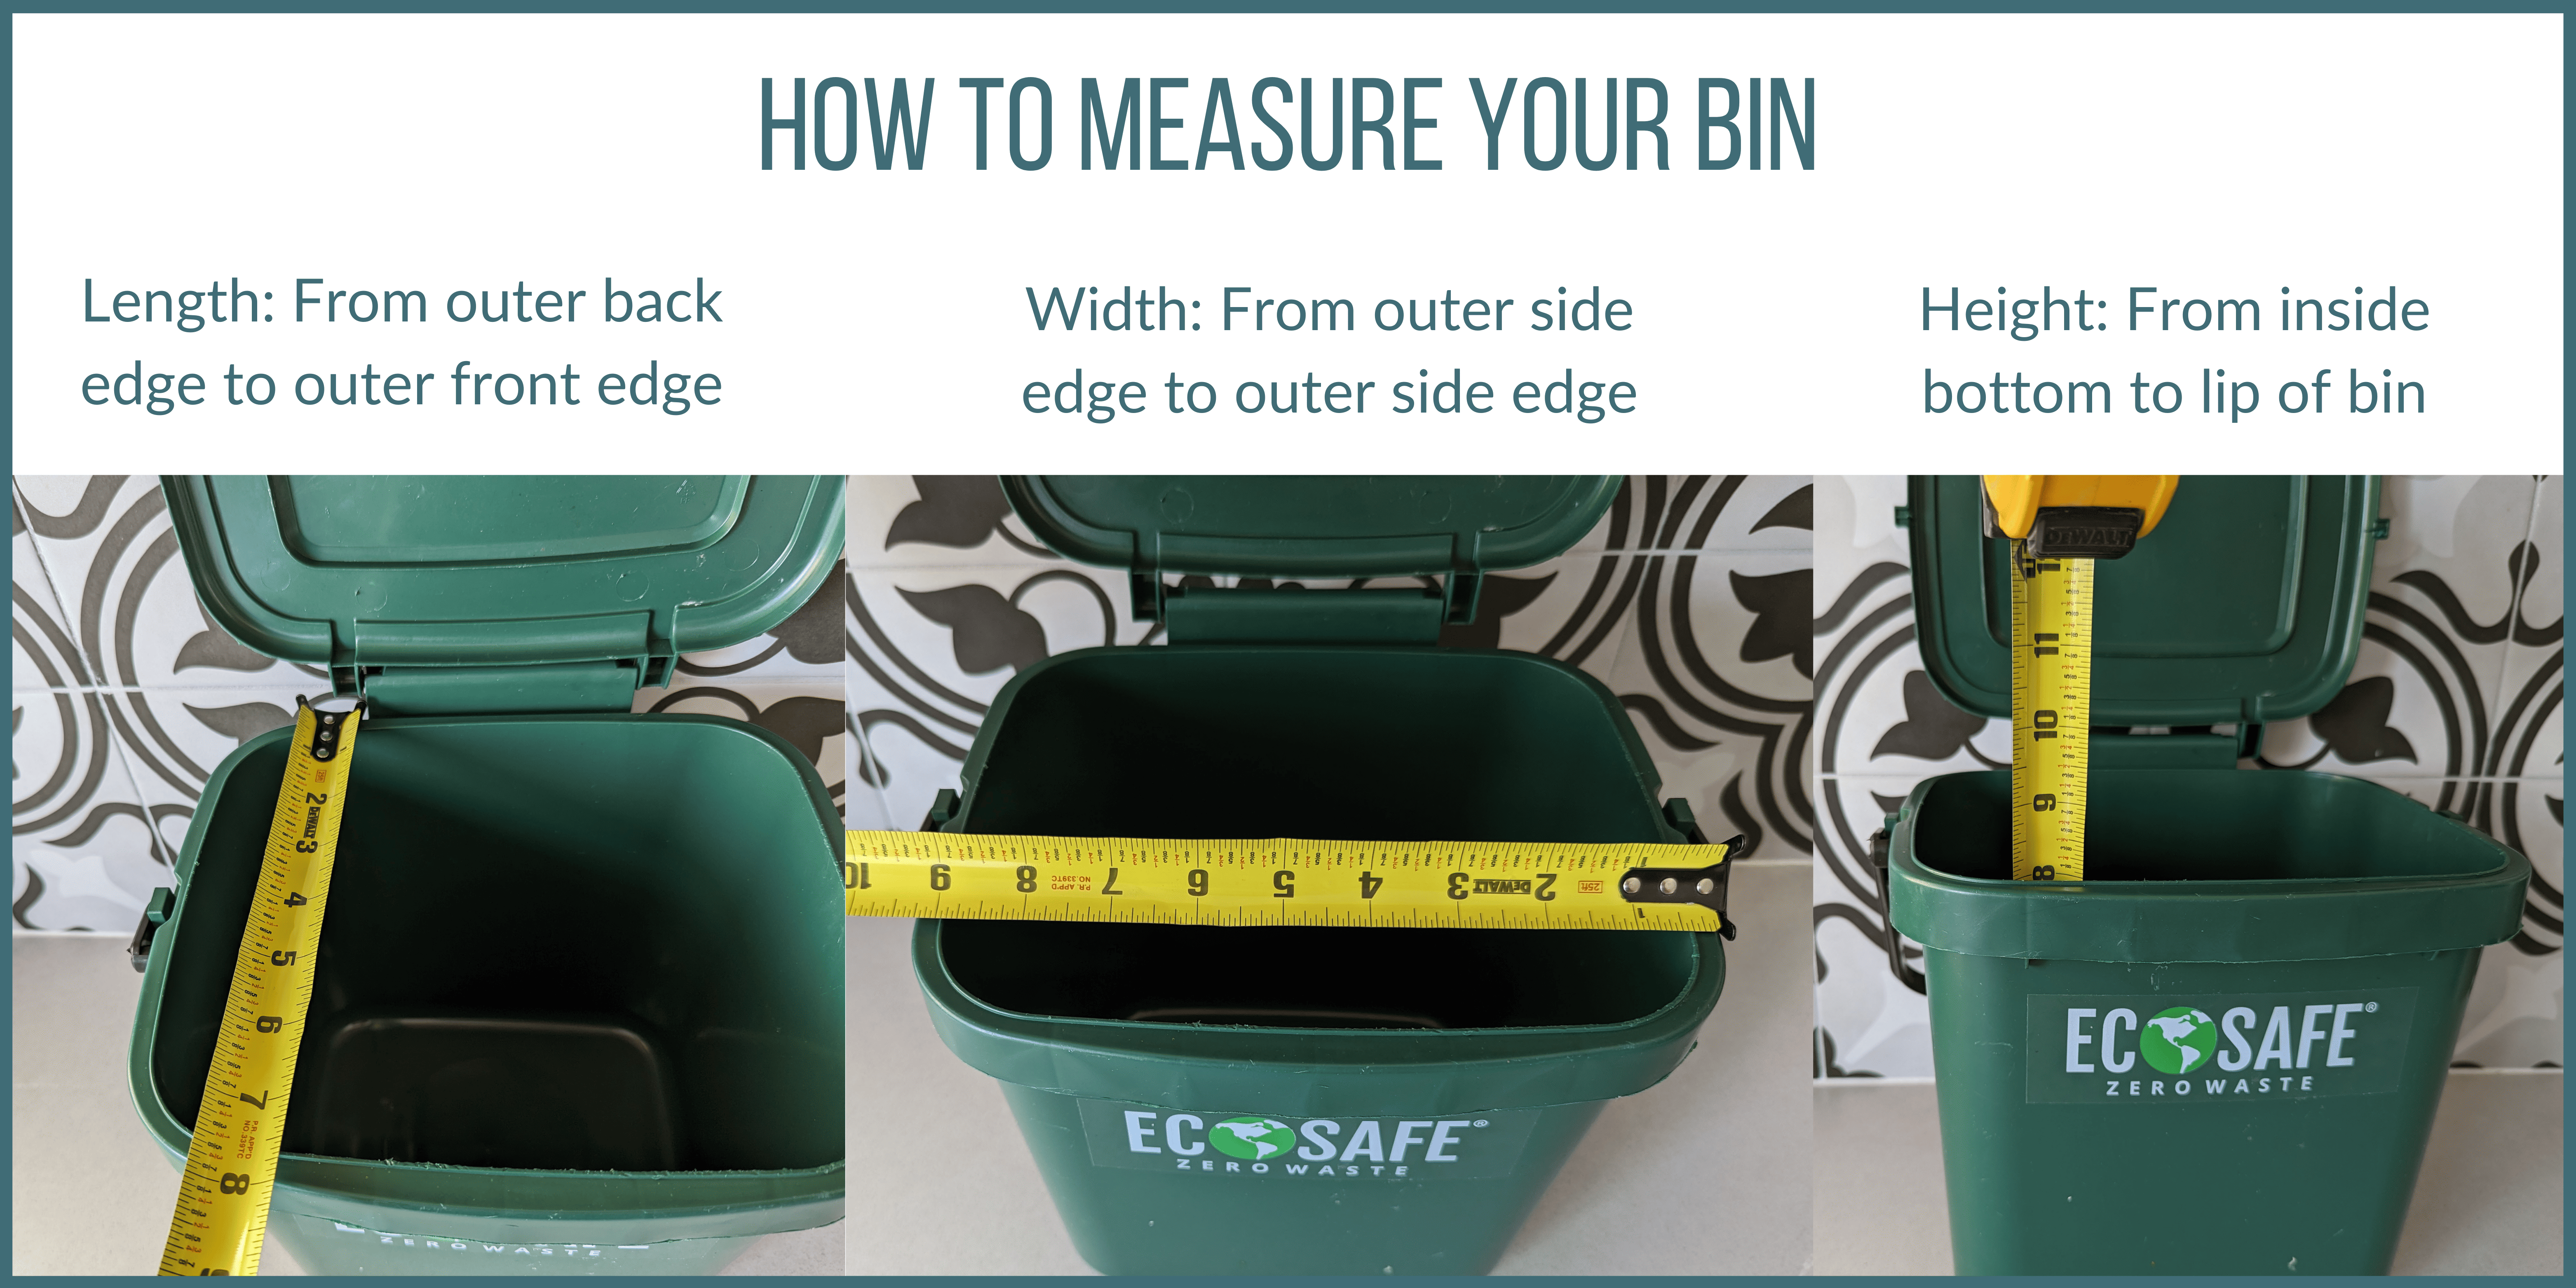 https://ecosafe.green/wp-content/uploads/2023/05/How-to-measure-your-bin.png